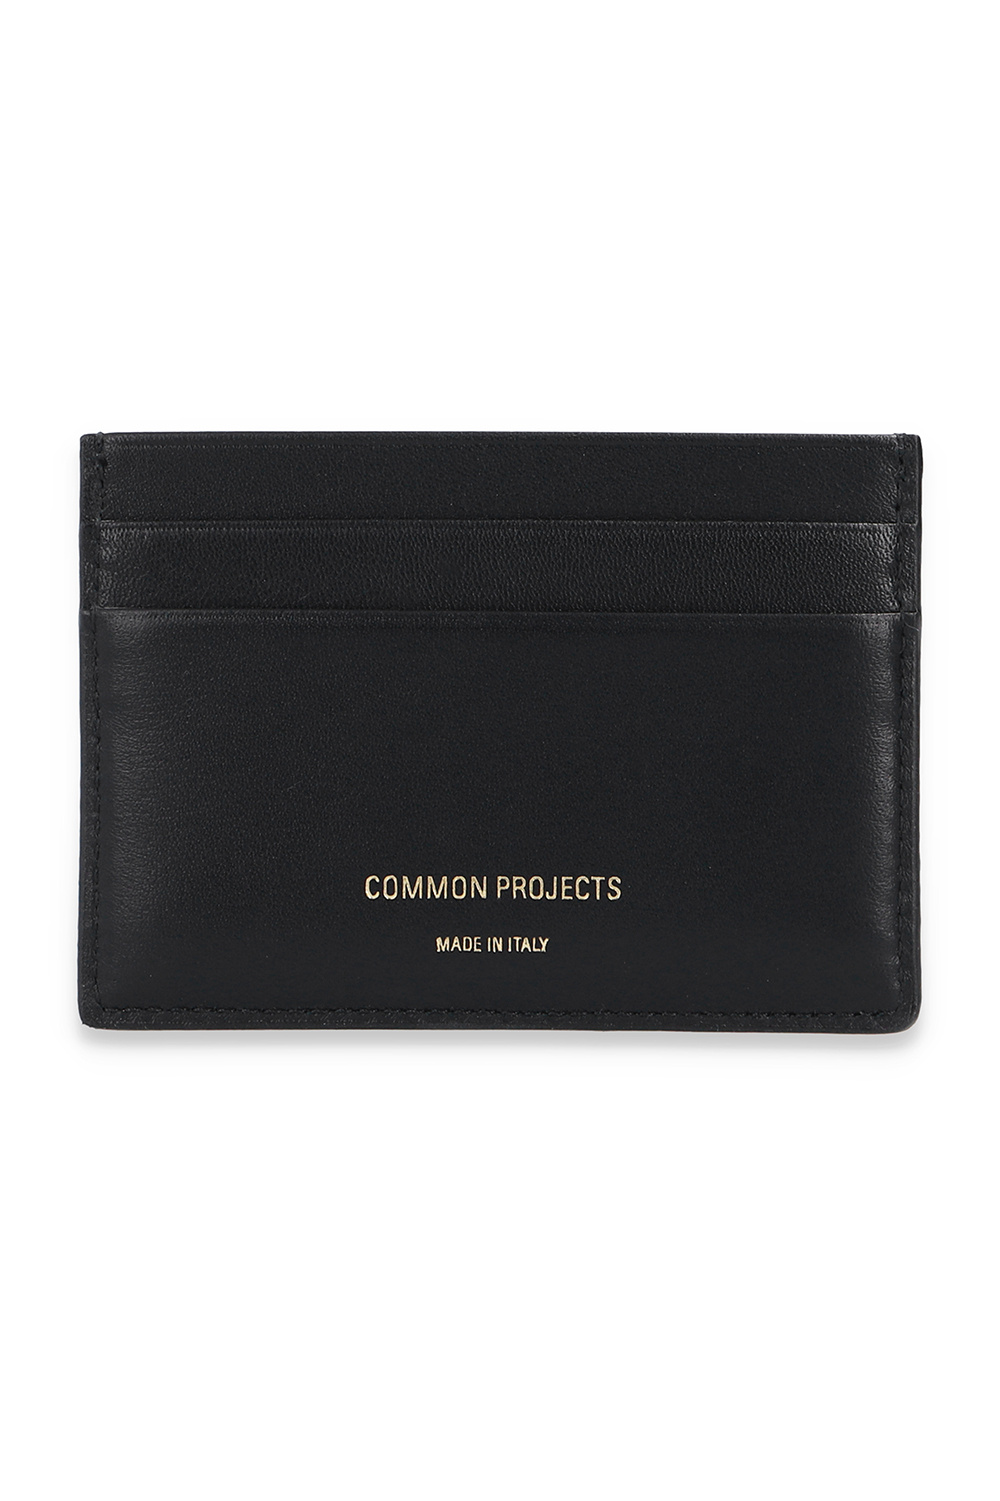 Common Projects A history of the brand